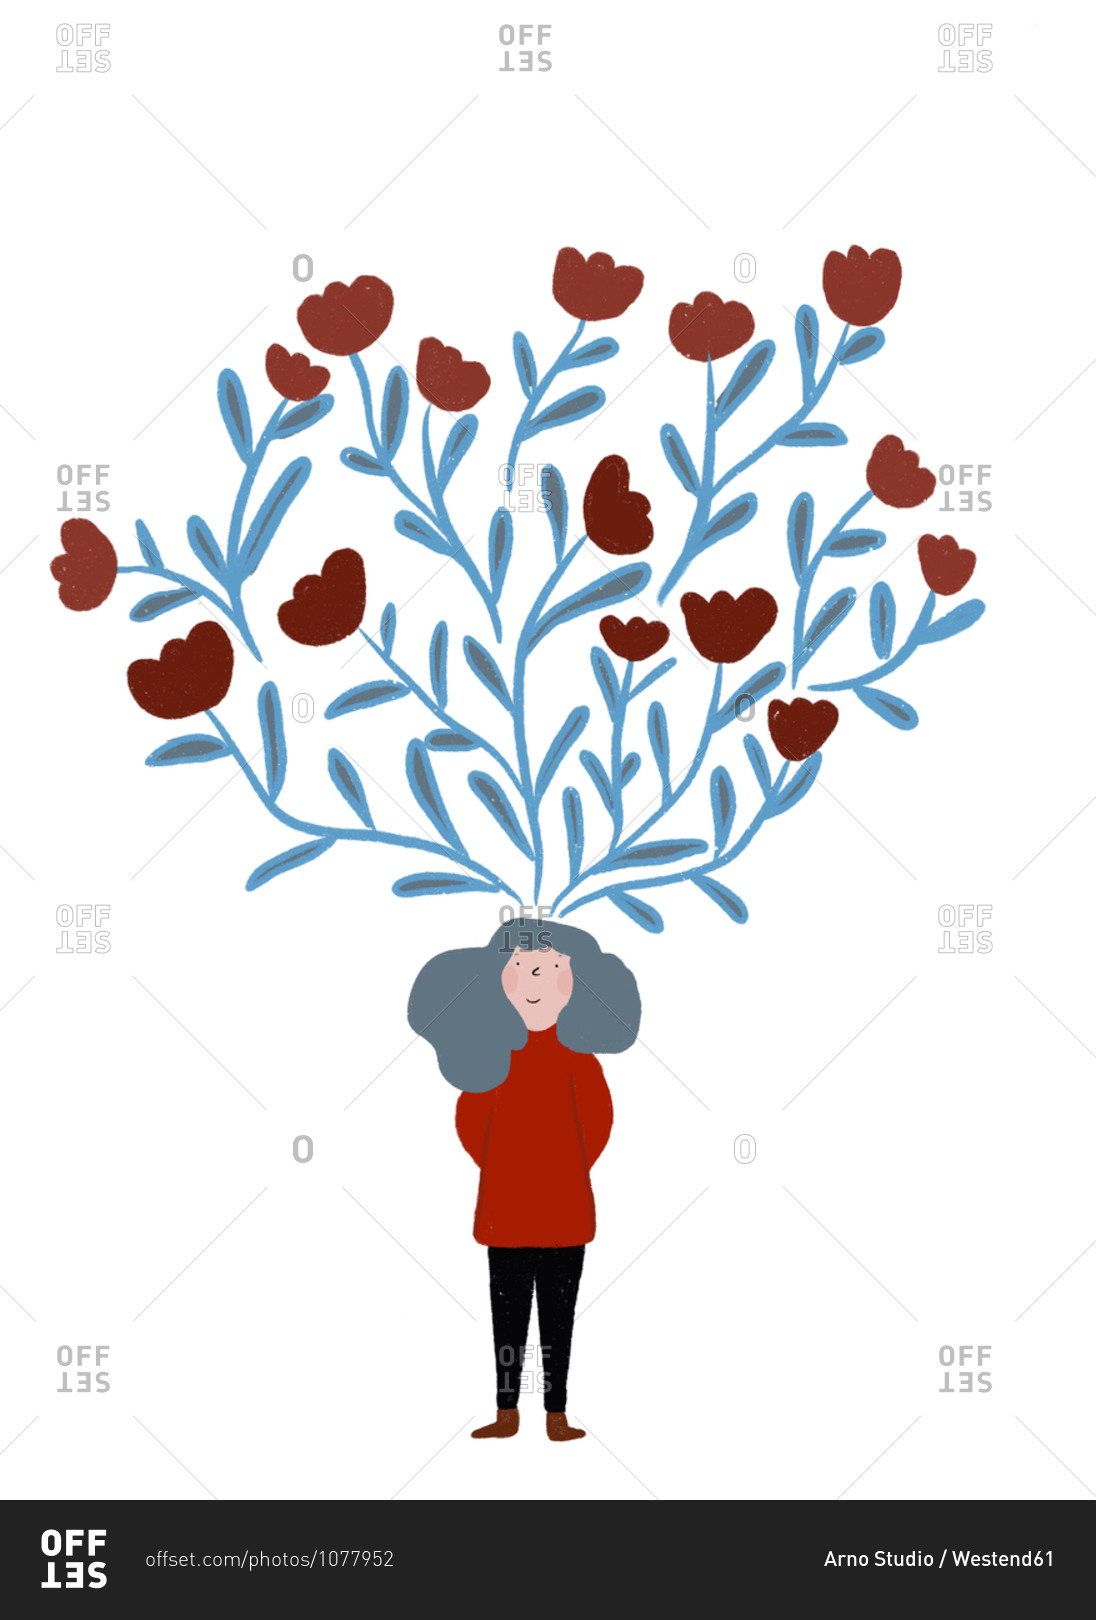 Clip art of blooming tulips representing imagination of woman standing with hands behind back